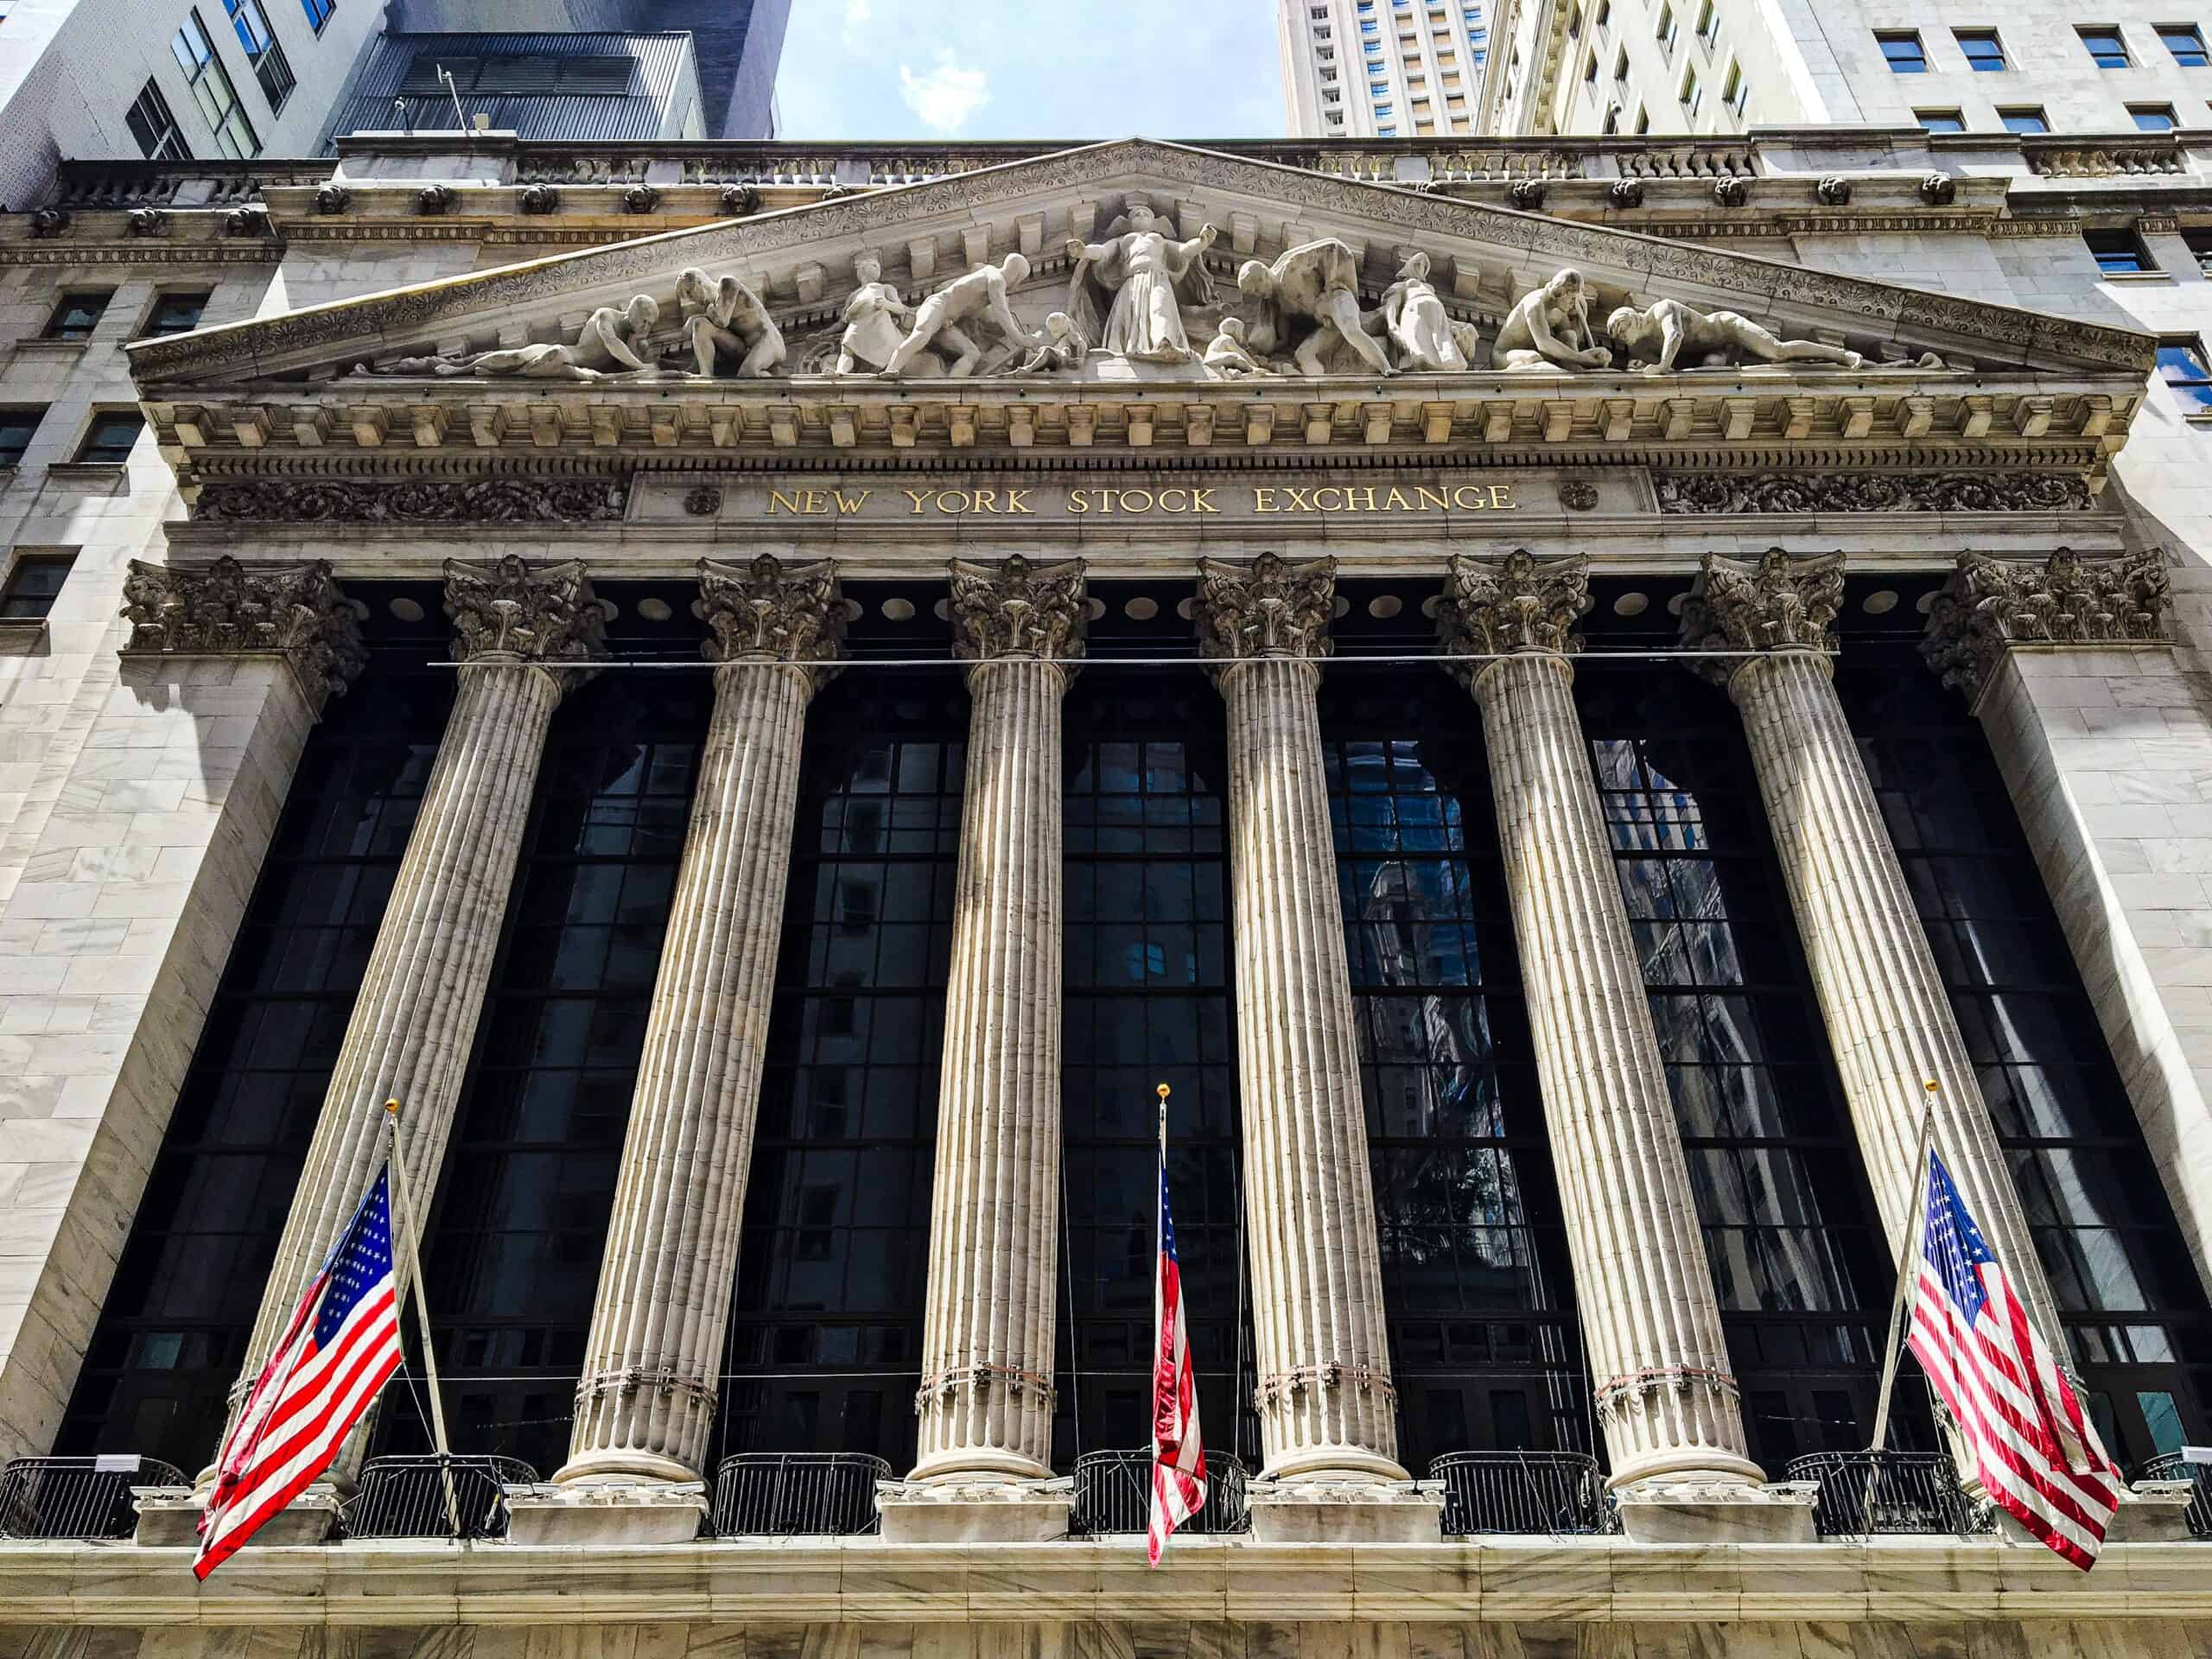 New York Stock Exchange building with American flags